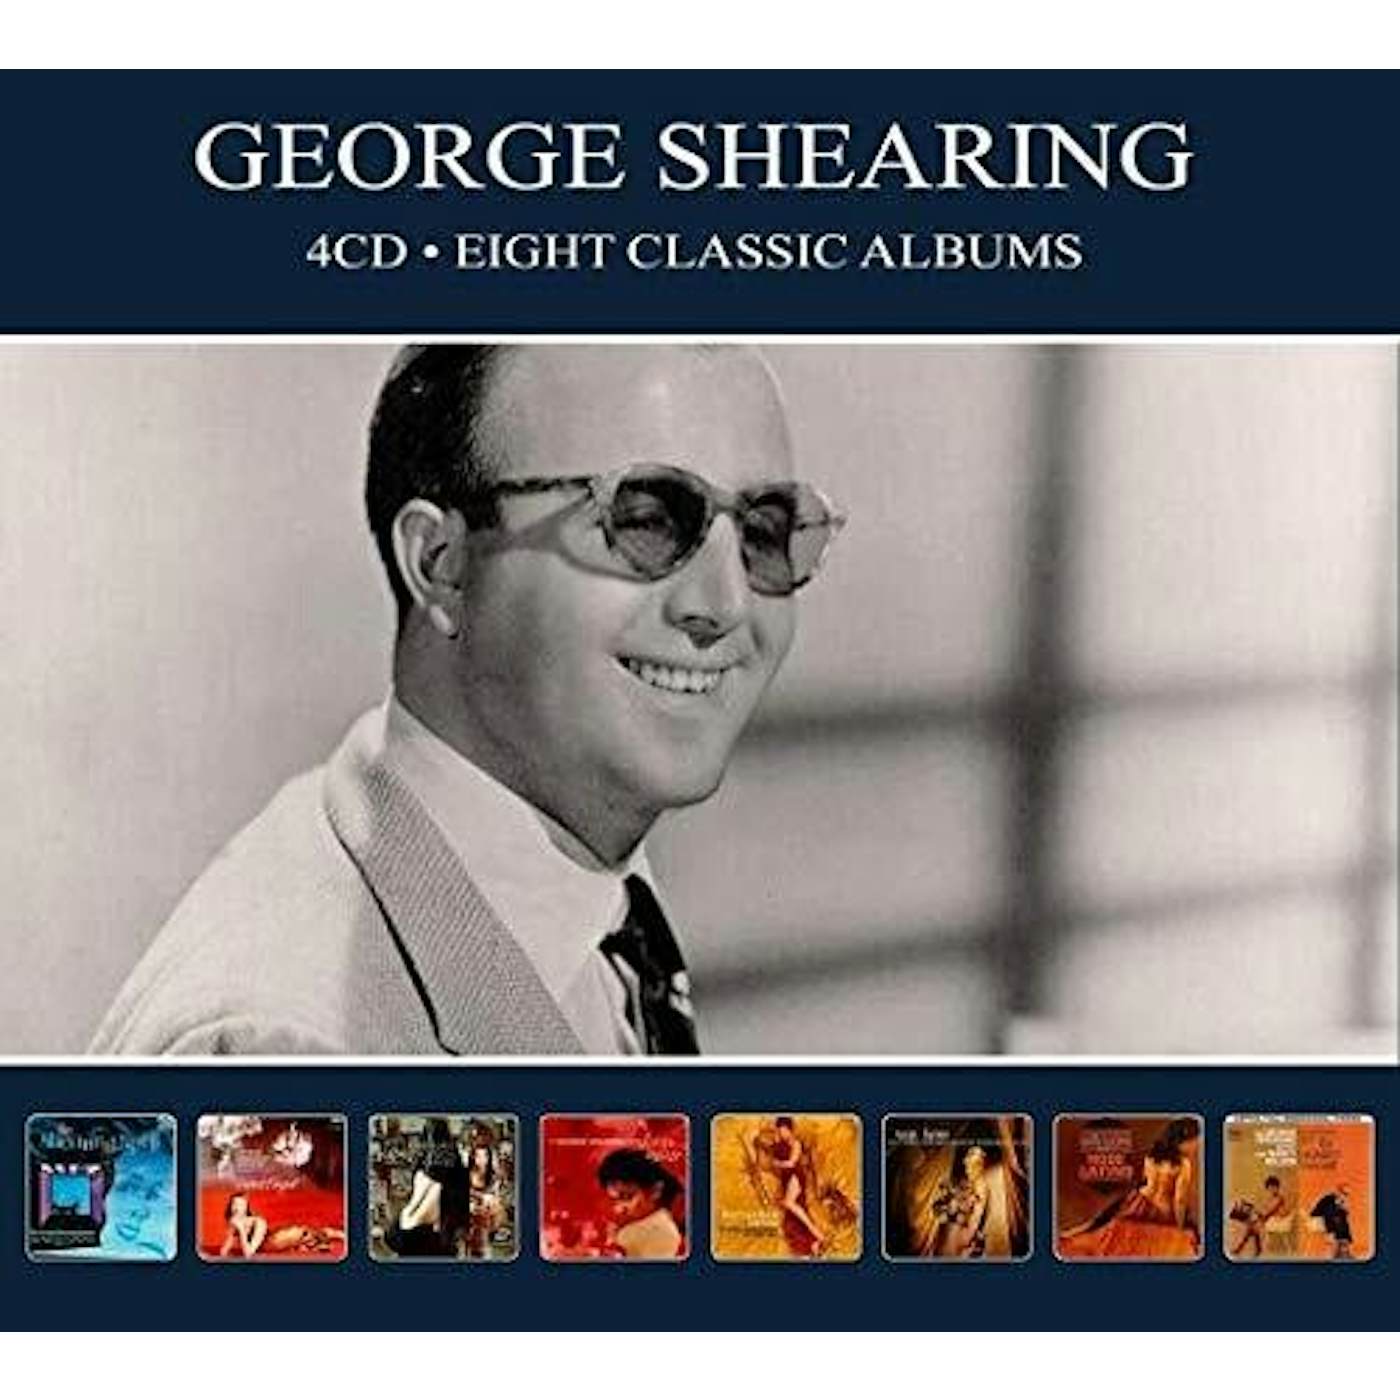 George Shearing EIGHT CLASSIC ALBUMS CD